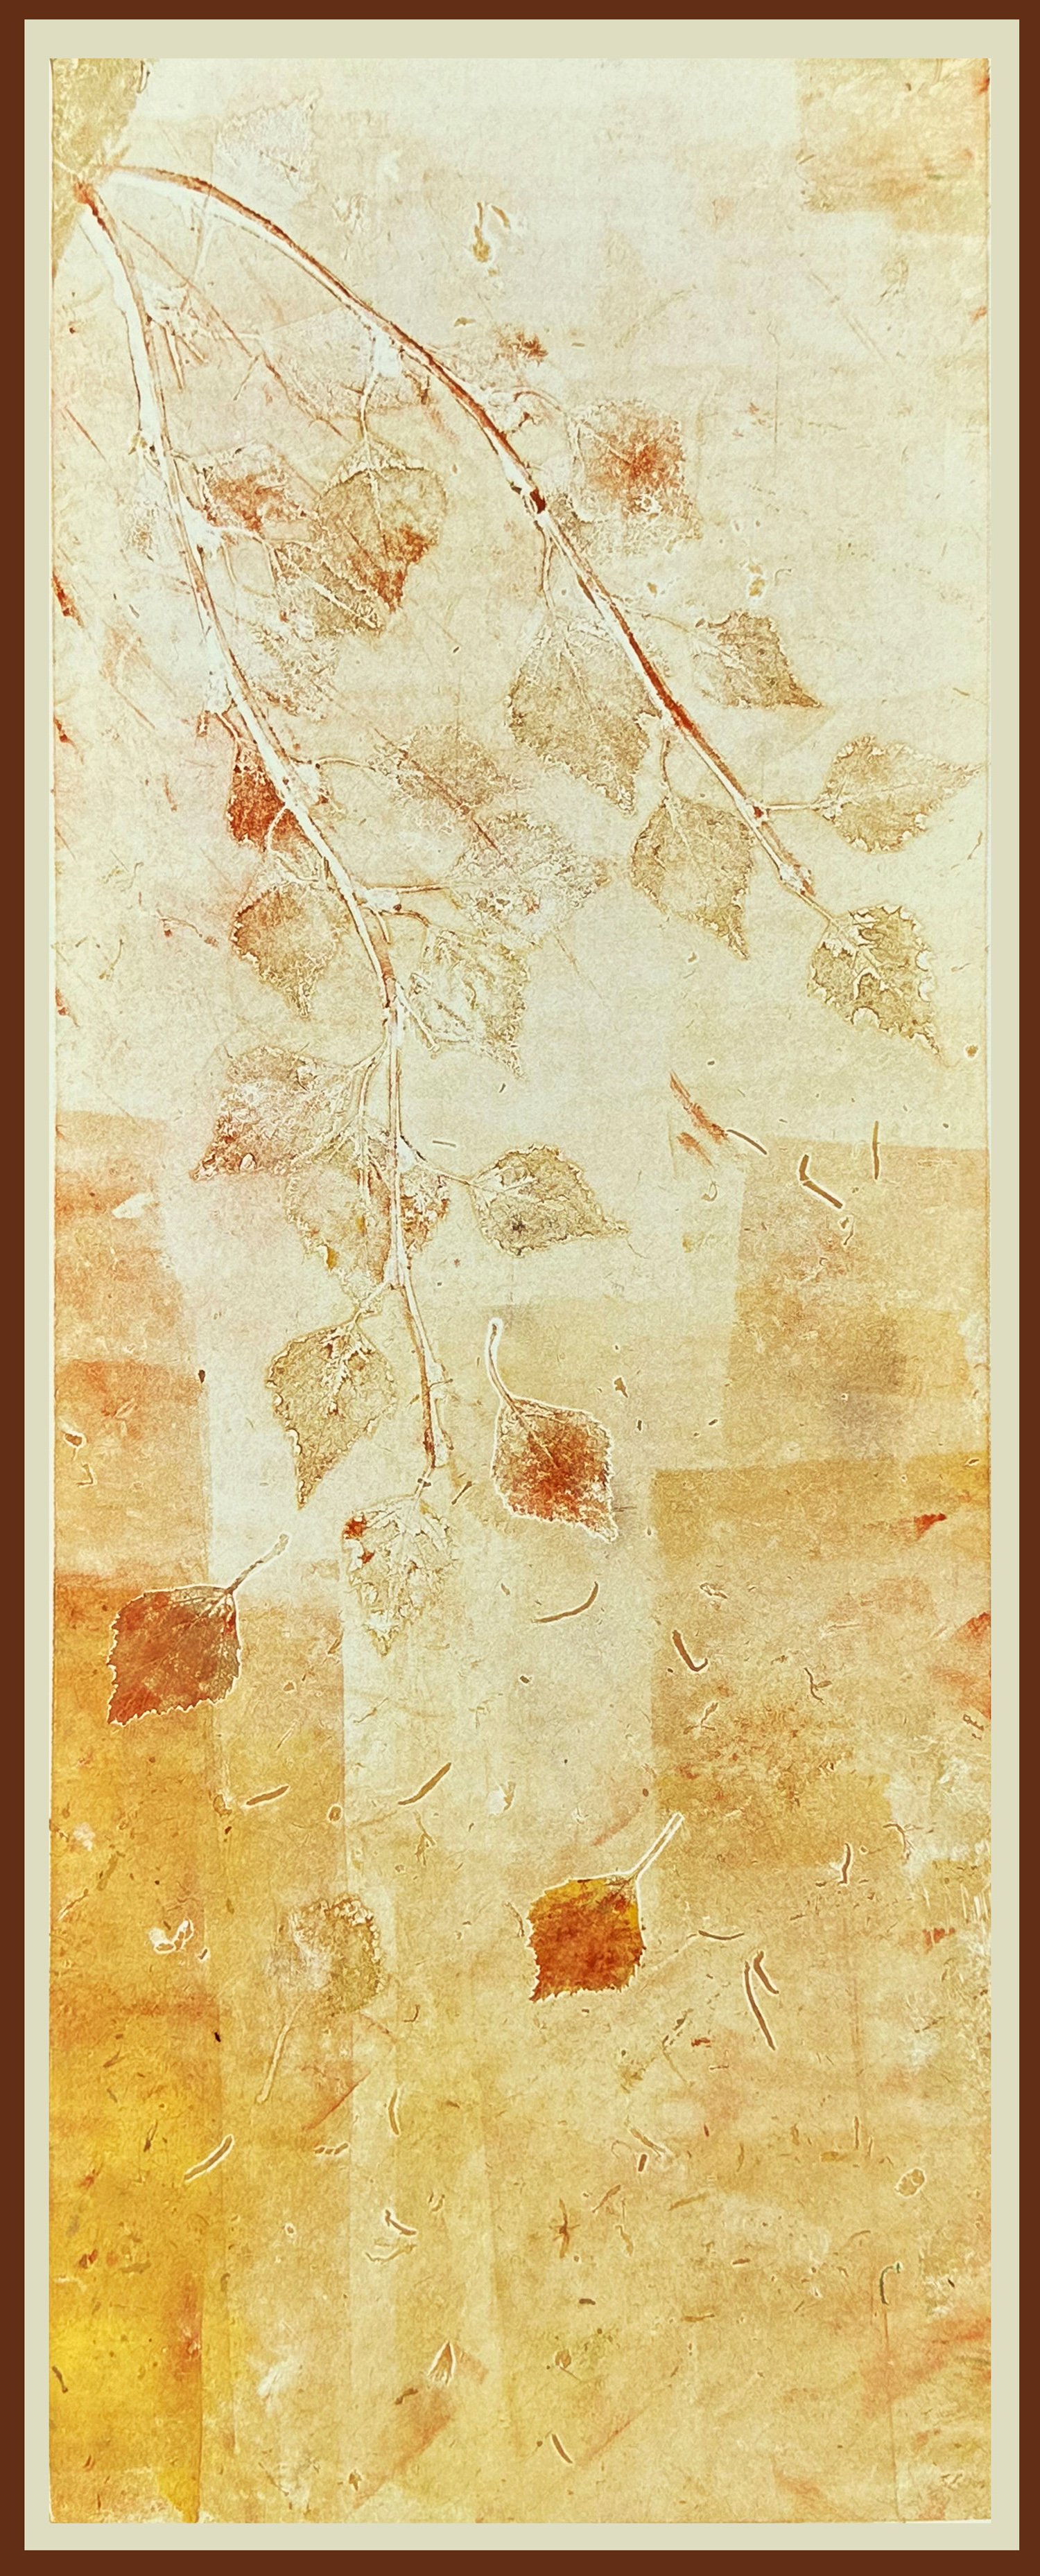    “And the Leaves Fall”    Monotype, Framed and Floated @ 15 x 31”, 1/1    $820 - SOLD  